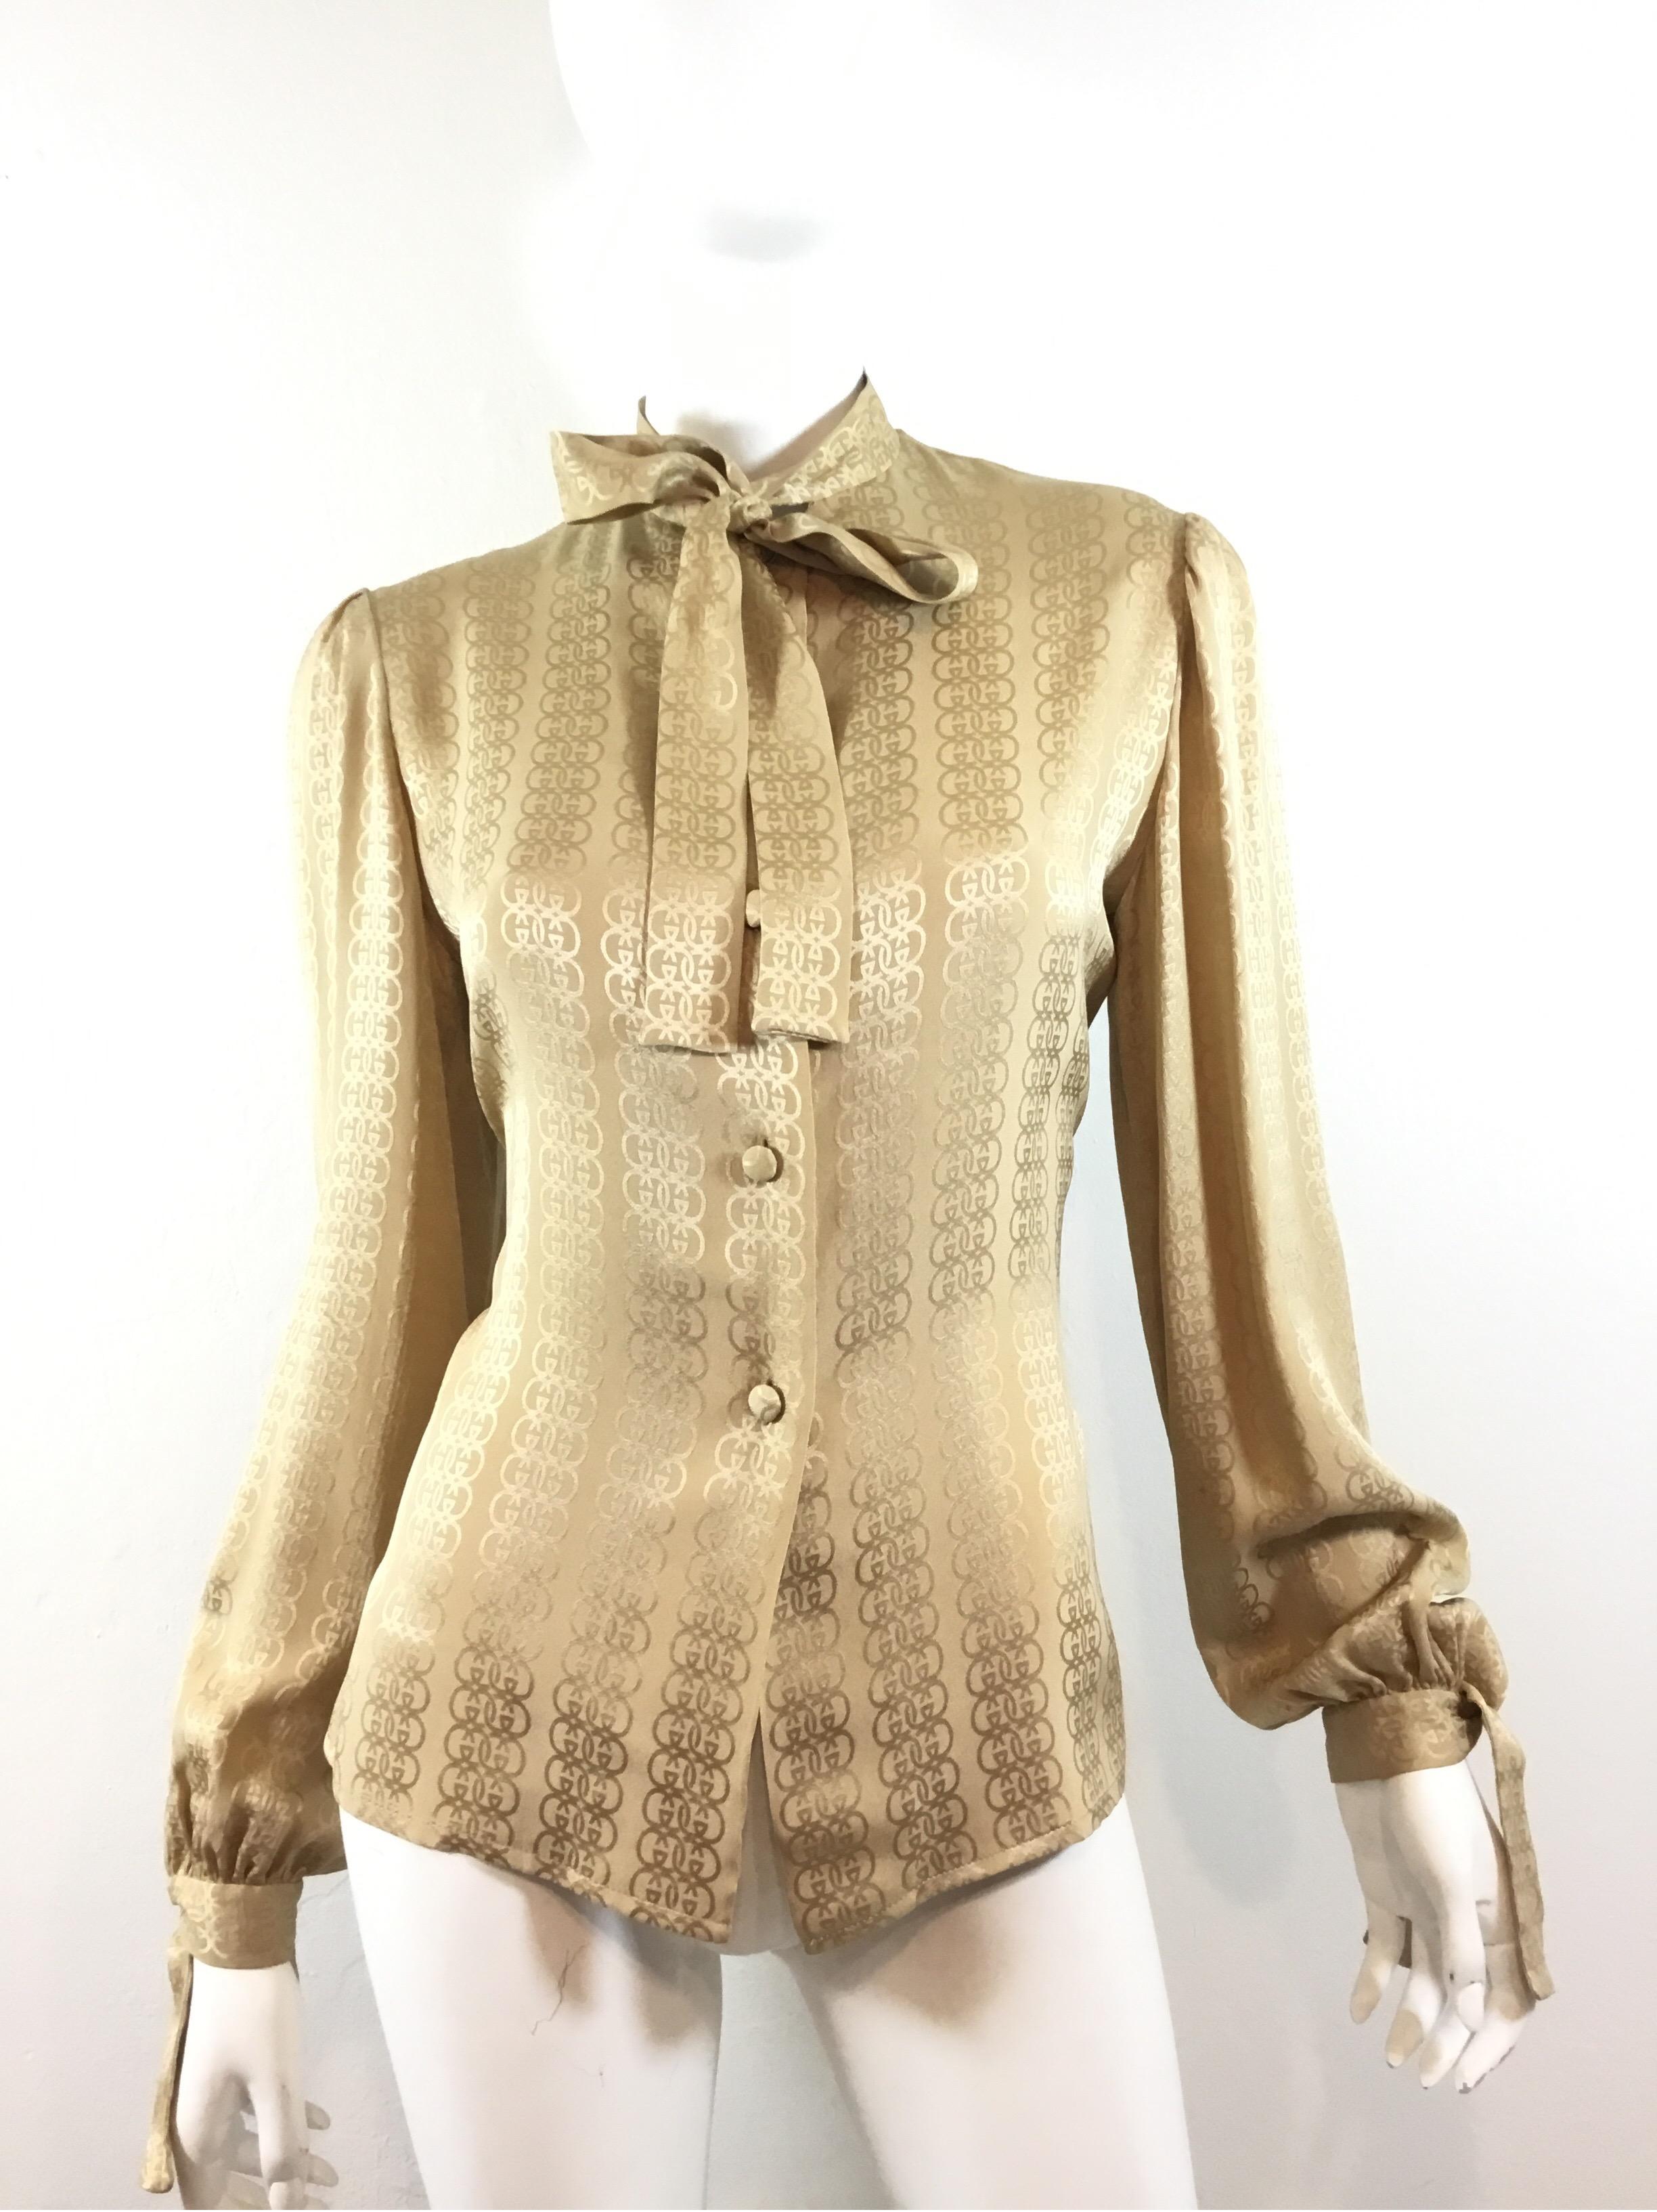 Gucci silk blouse featured in a beige/tan color with the signature GG monogram throughout. Blouse has button fastenings along the front and on the cuffs, and has an attached neck tie. 100% silk, labeled size 48, made in Italy. Excellent